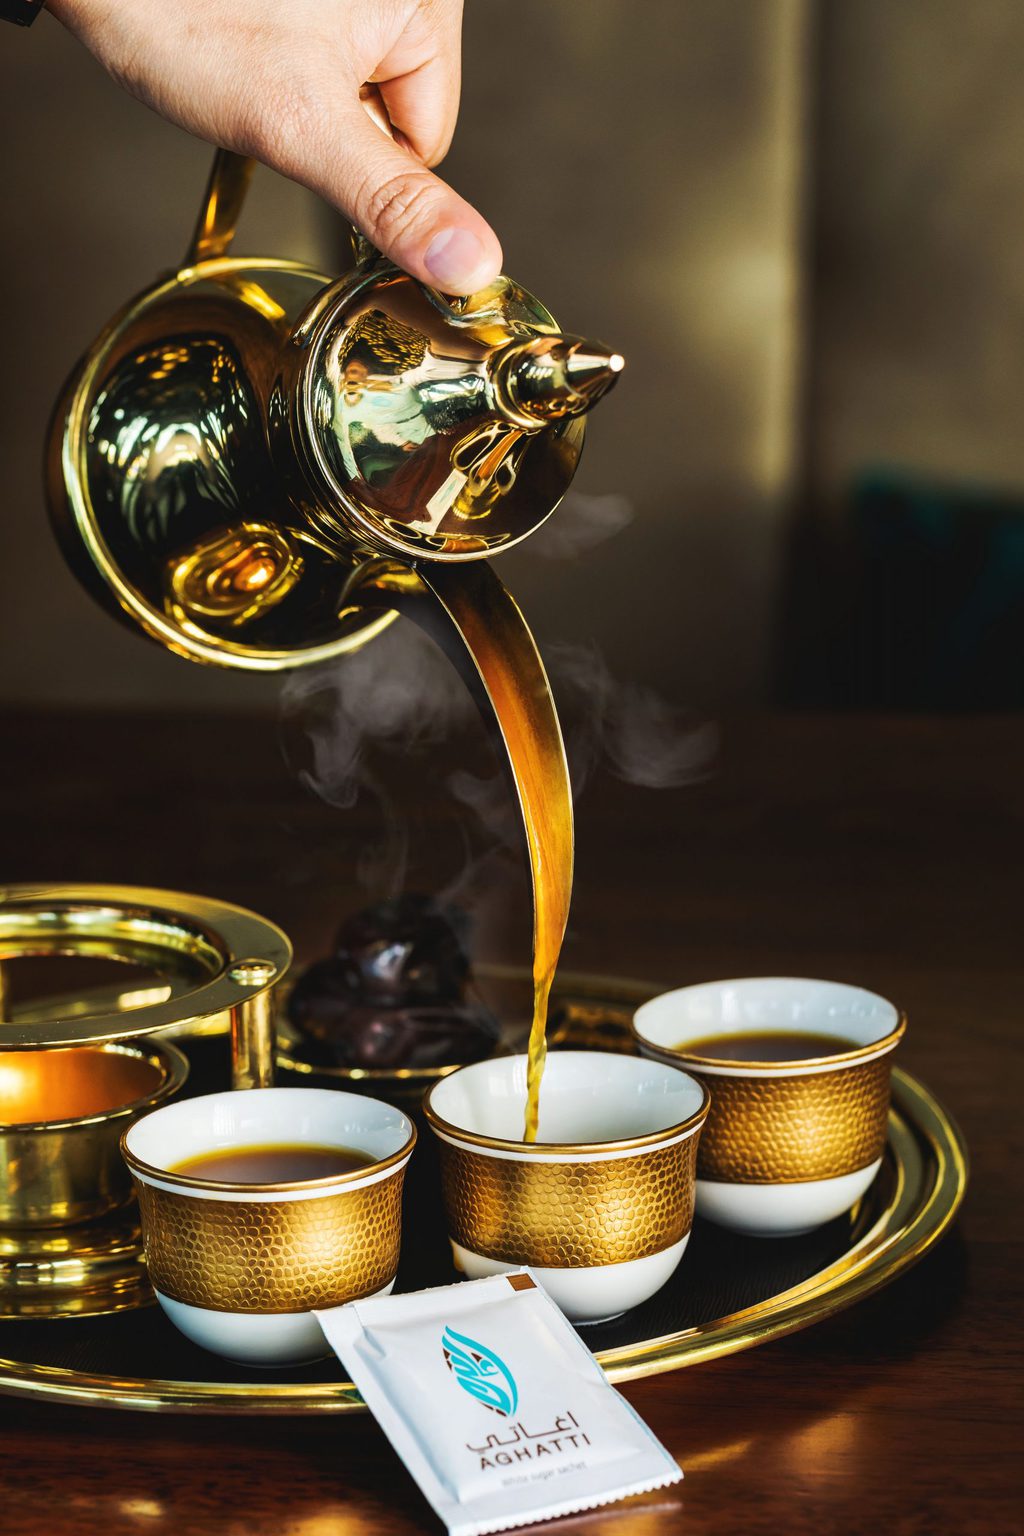 Arabic Coffee being poured from a gold coffee jug into small white china cups with gold edges, all on a gold tray, at a coffee shop in Dubai